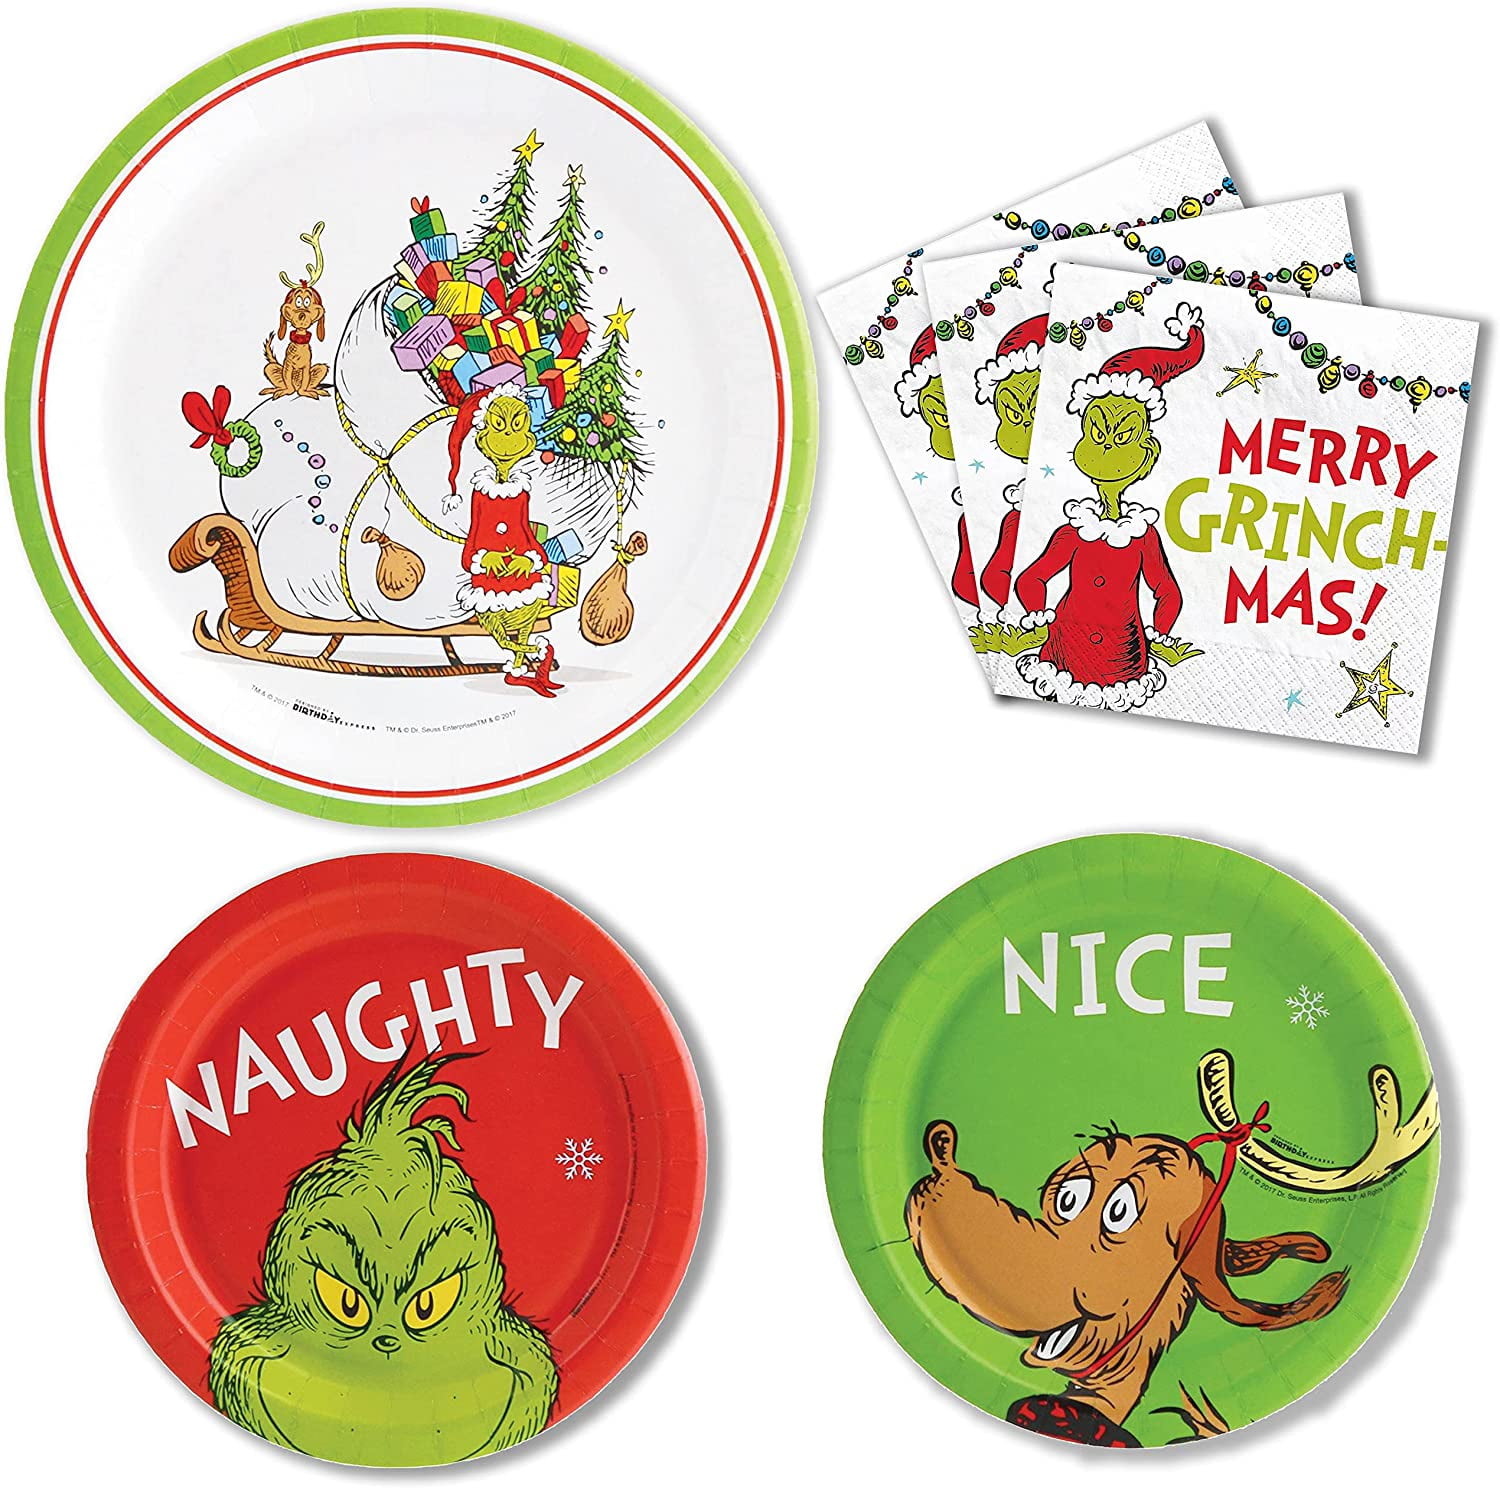 Cute Christmas Grinch Design Serving Tray*Melamine Party Platter 13 x 10" NEW! 